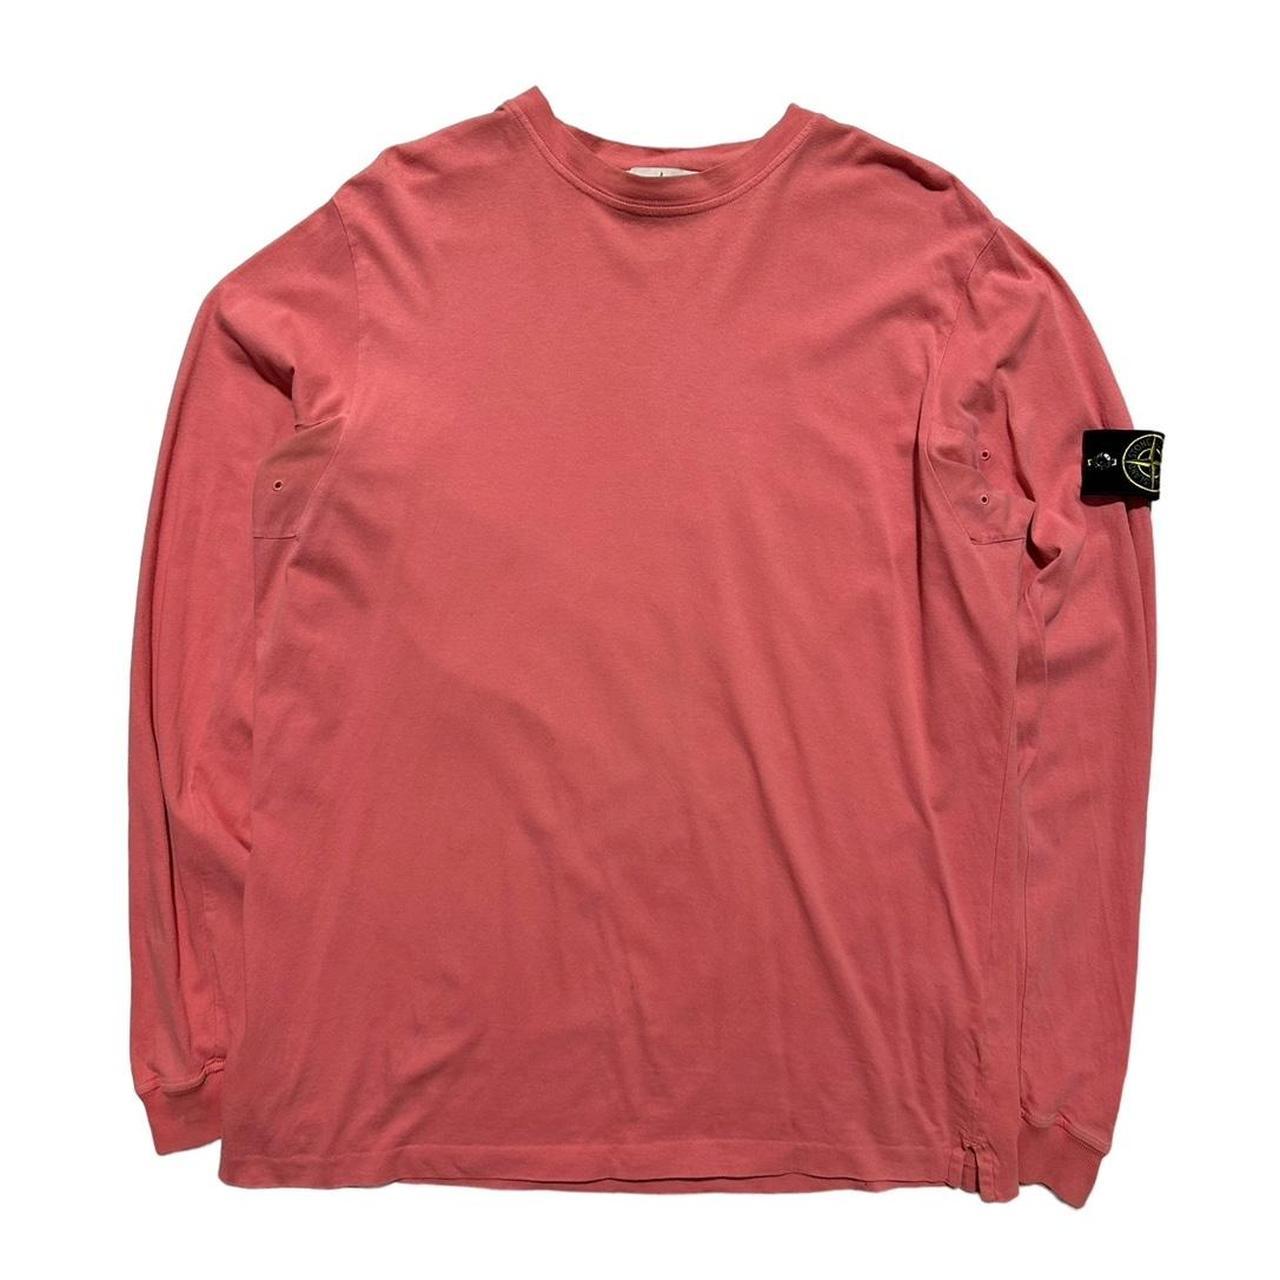 Stone Island Coral Long Sleeve Top - Known Source